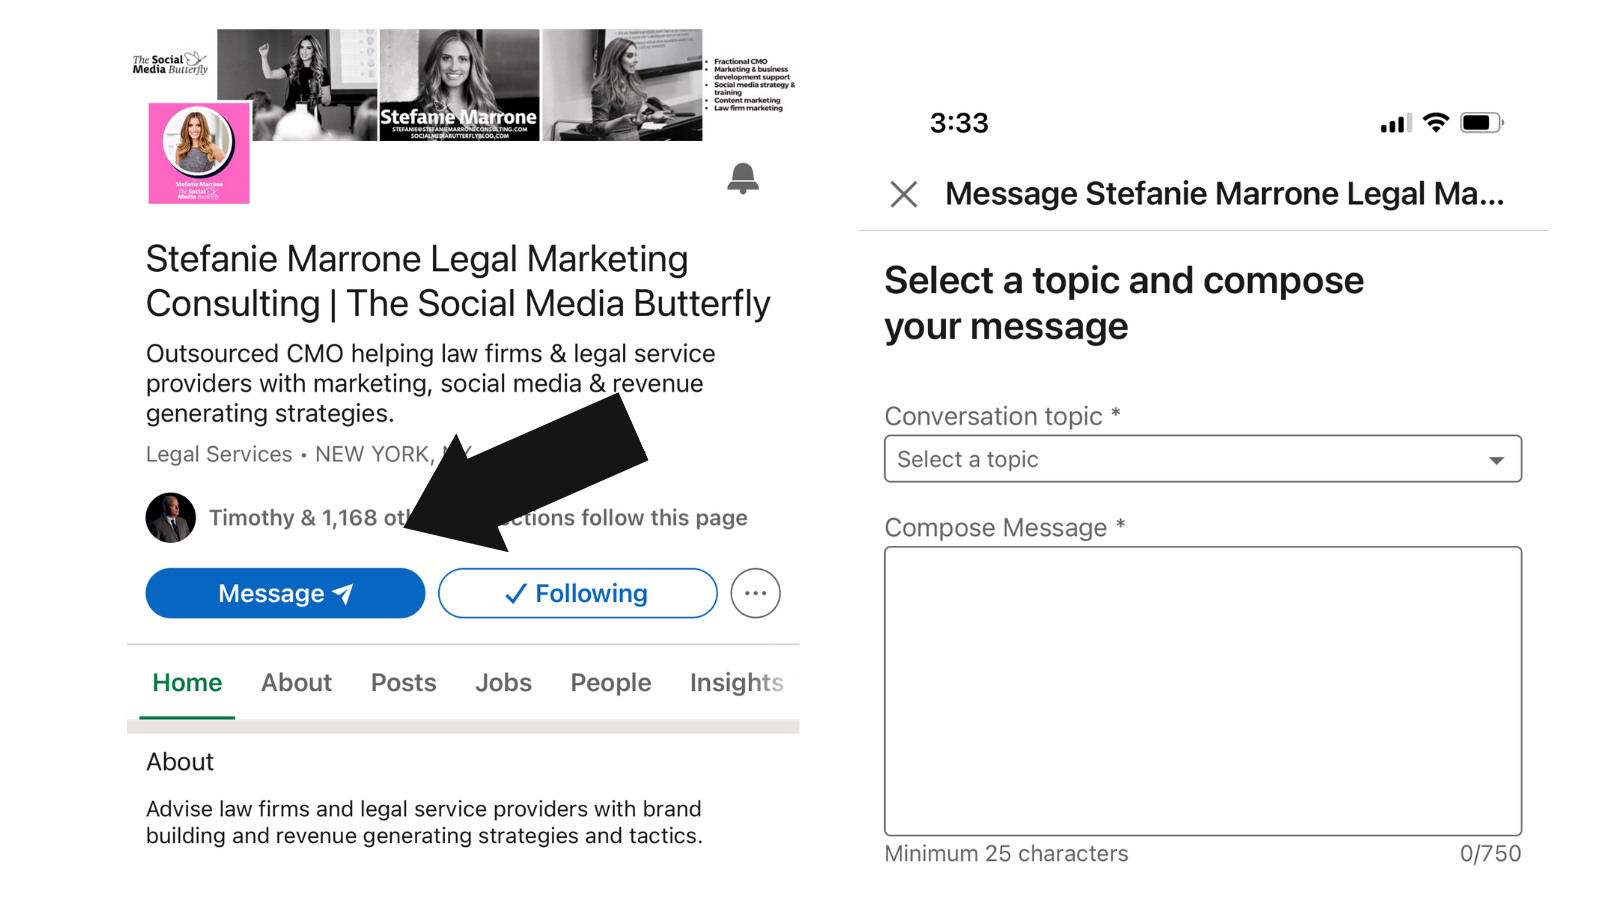 LinkedIn New Feature: LinkedIn Launches New Feature to Enable Direct Messaging with Company Pages